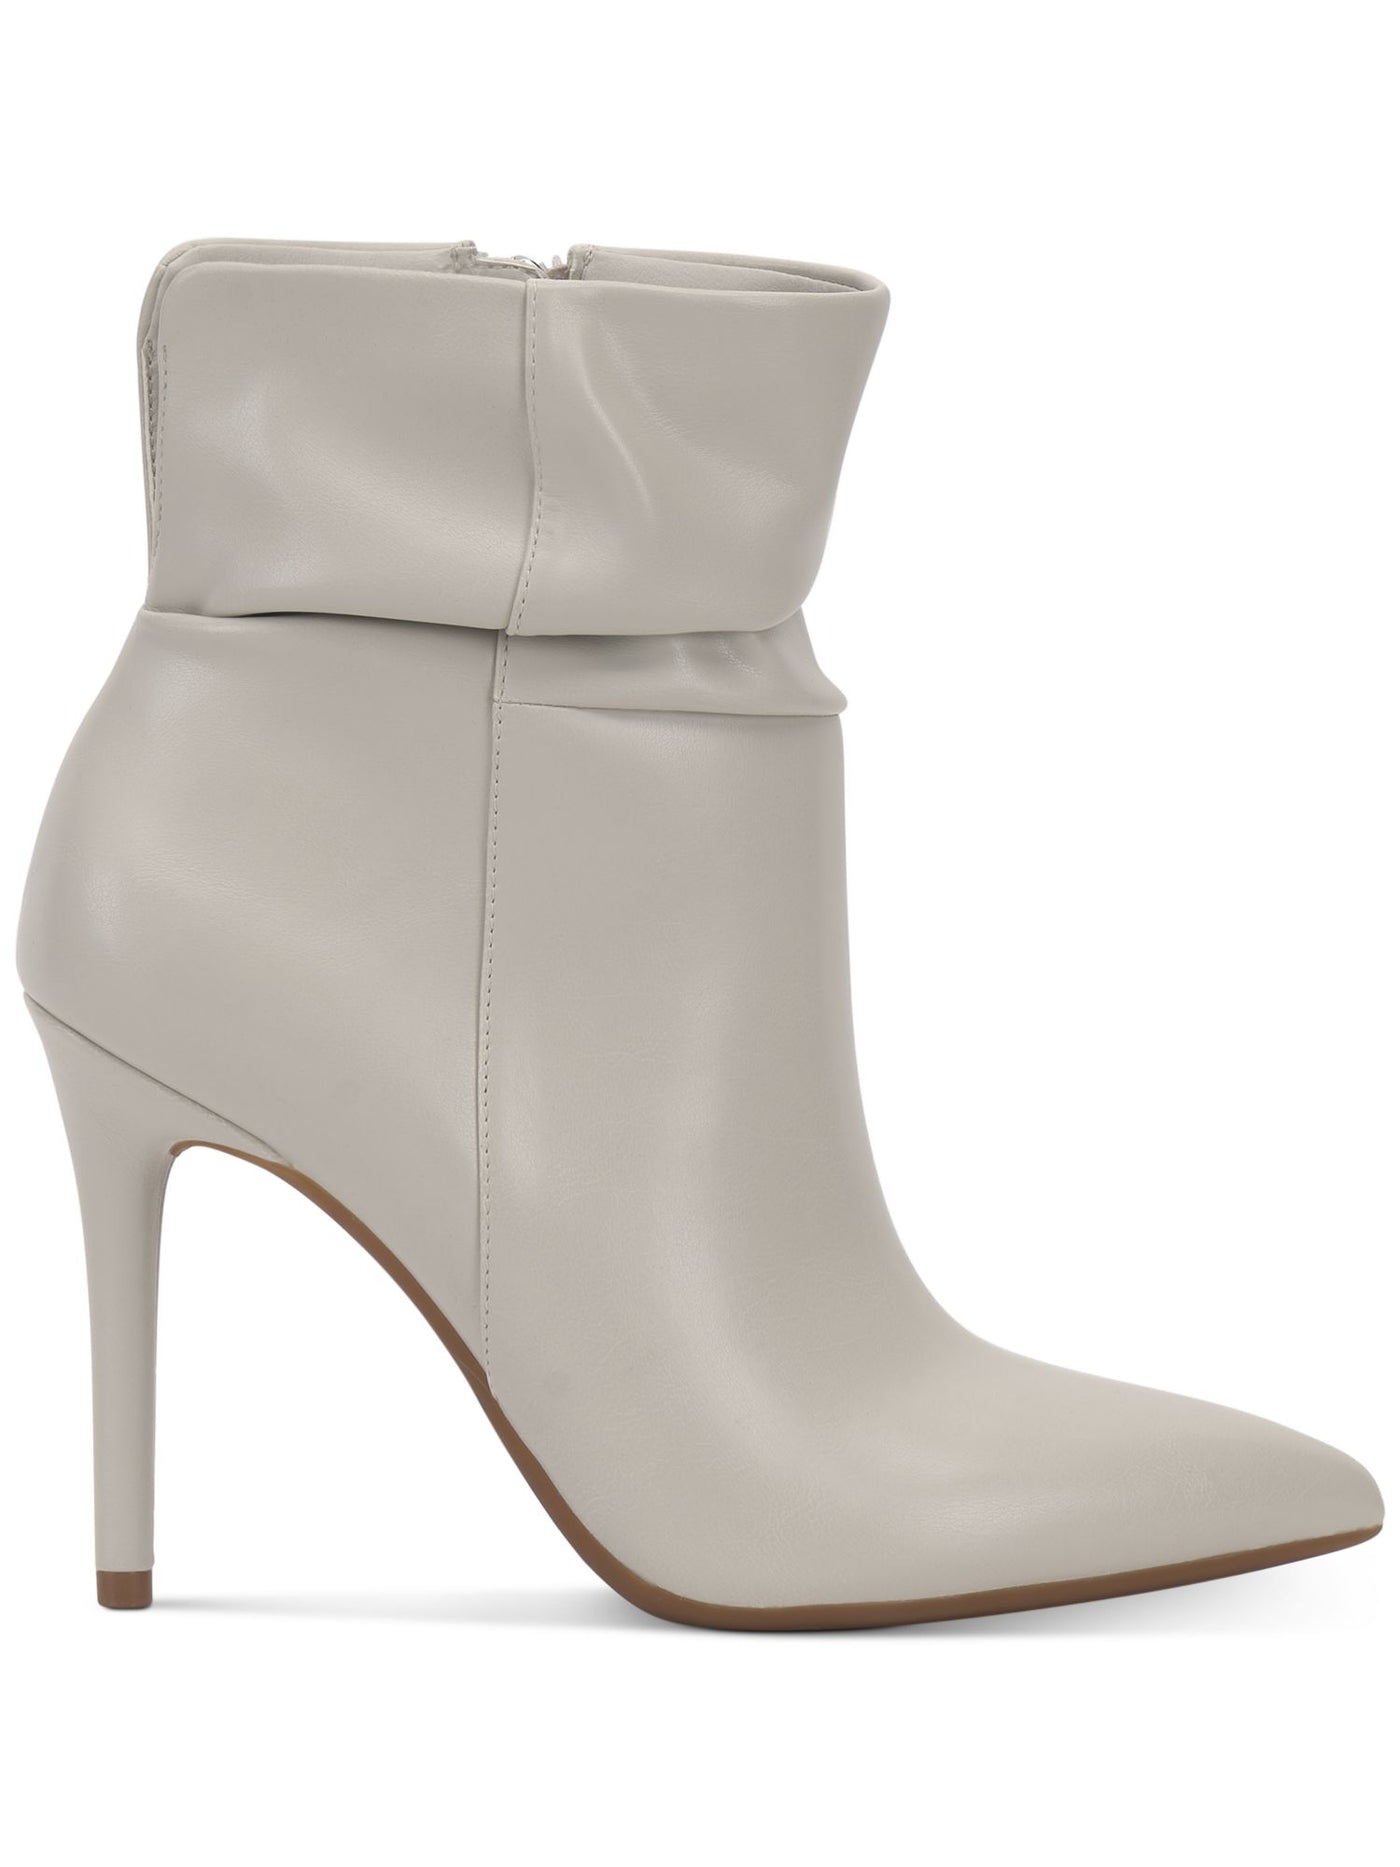 JESSICA SIMPSON Womens Ivory Split Upper Back Cushioned Ruched Lerona Pointed Toe Stiletto Zip-Up Dress Booties 5.5 M